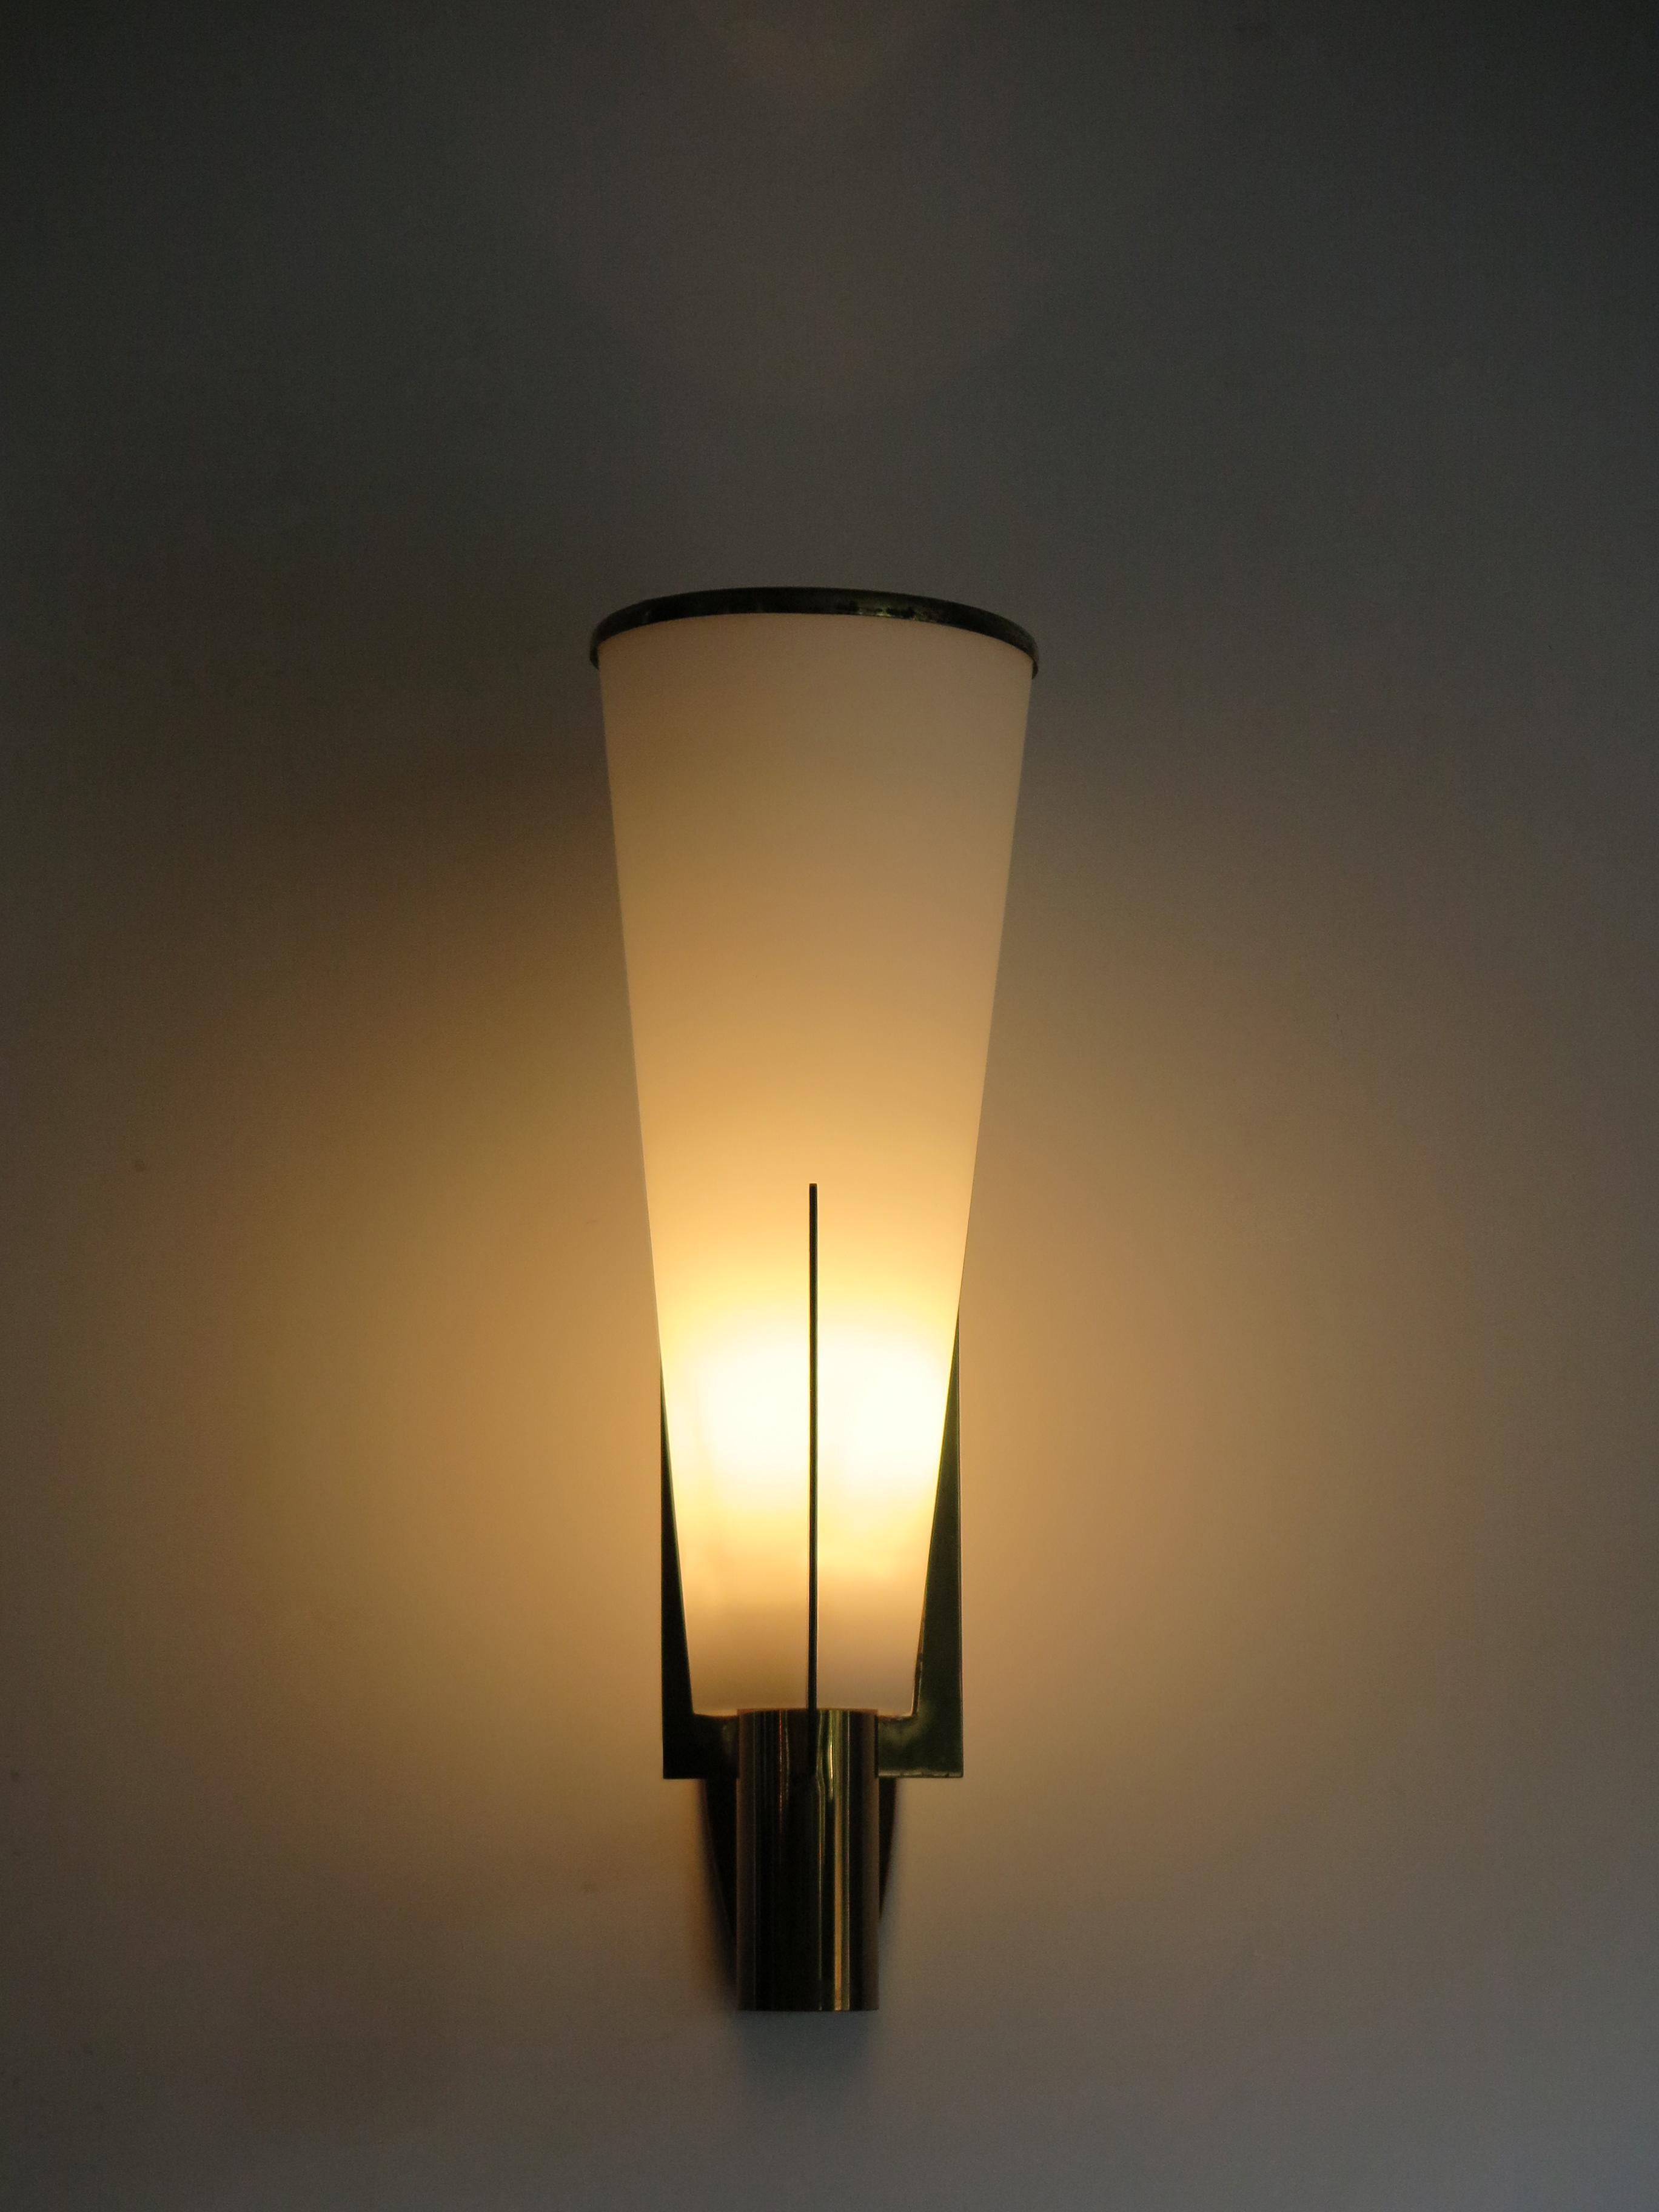 Tan France Auction Pick

Italian big wall lamp sconce model “2021/1” produced by Stilnovo,
brass structure and satin glass diffuser, Stilnovo Italy engraved on the structure and original manufacturer label, 1950s.

Please note that the lamp is